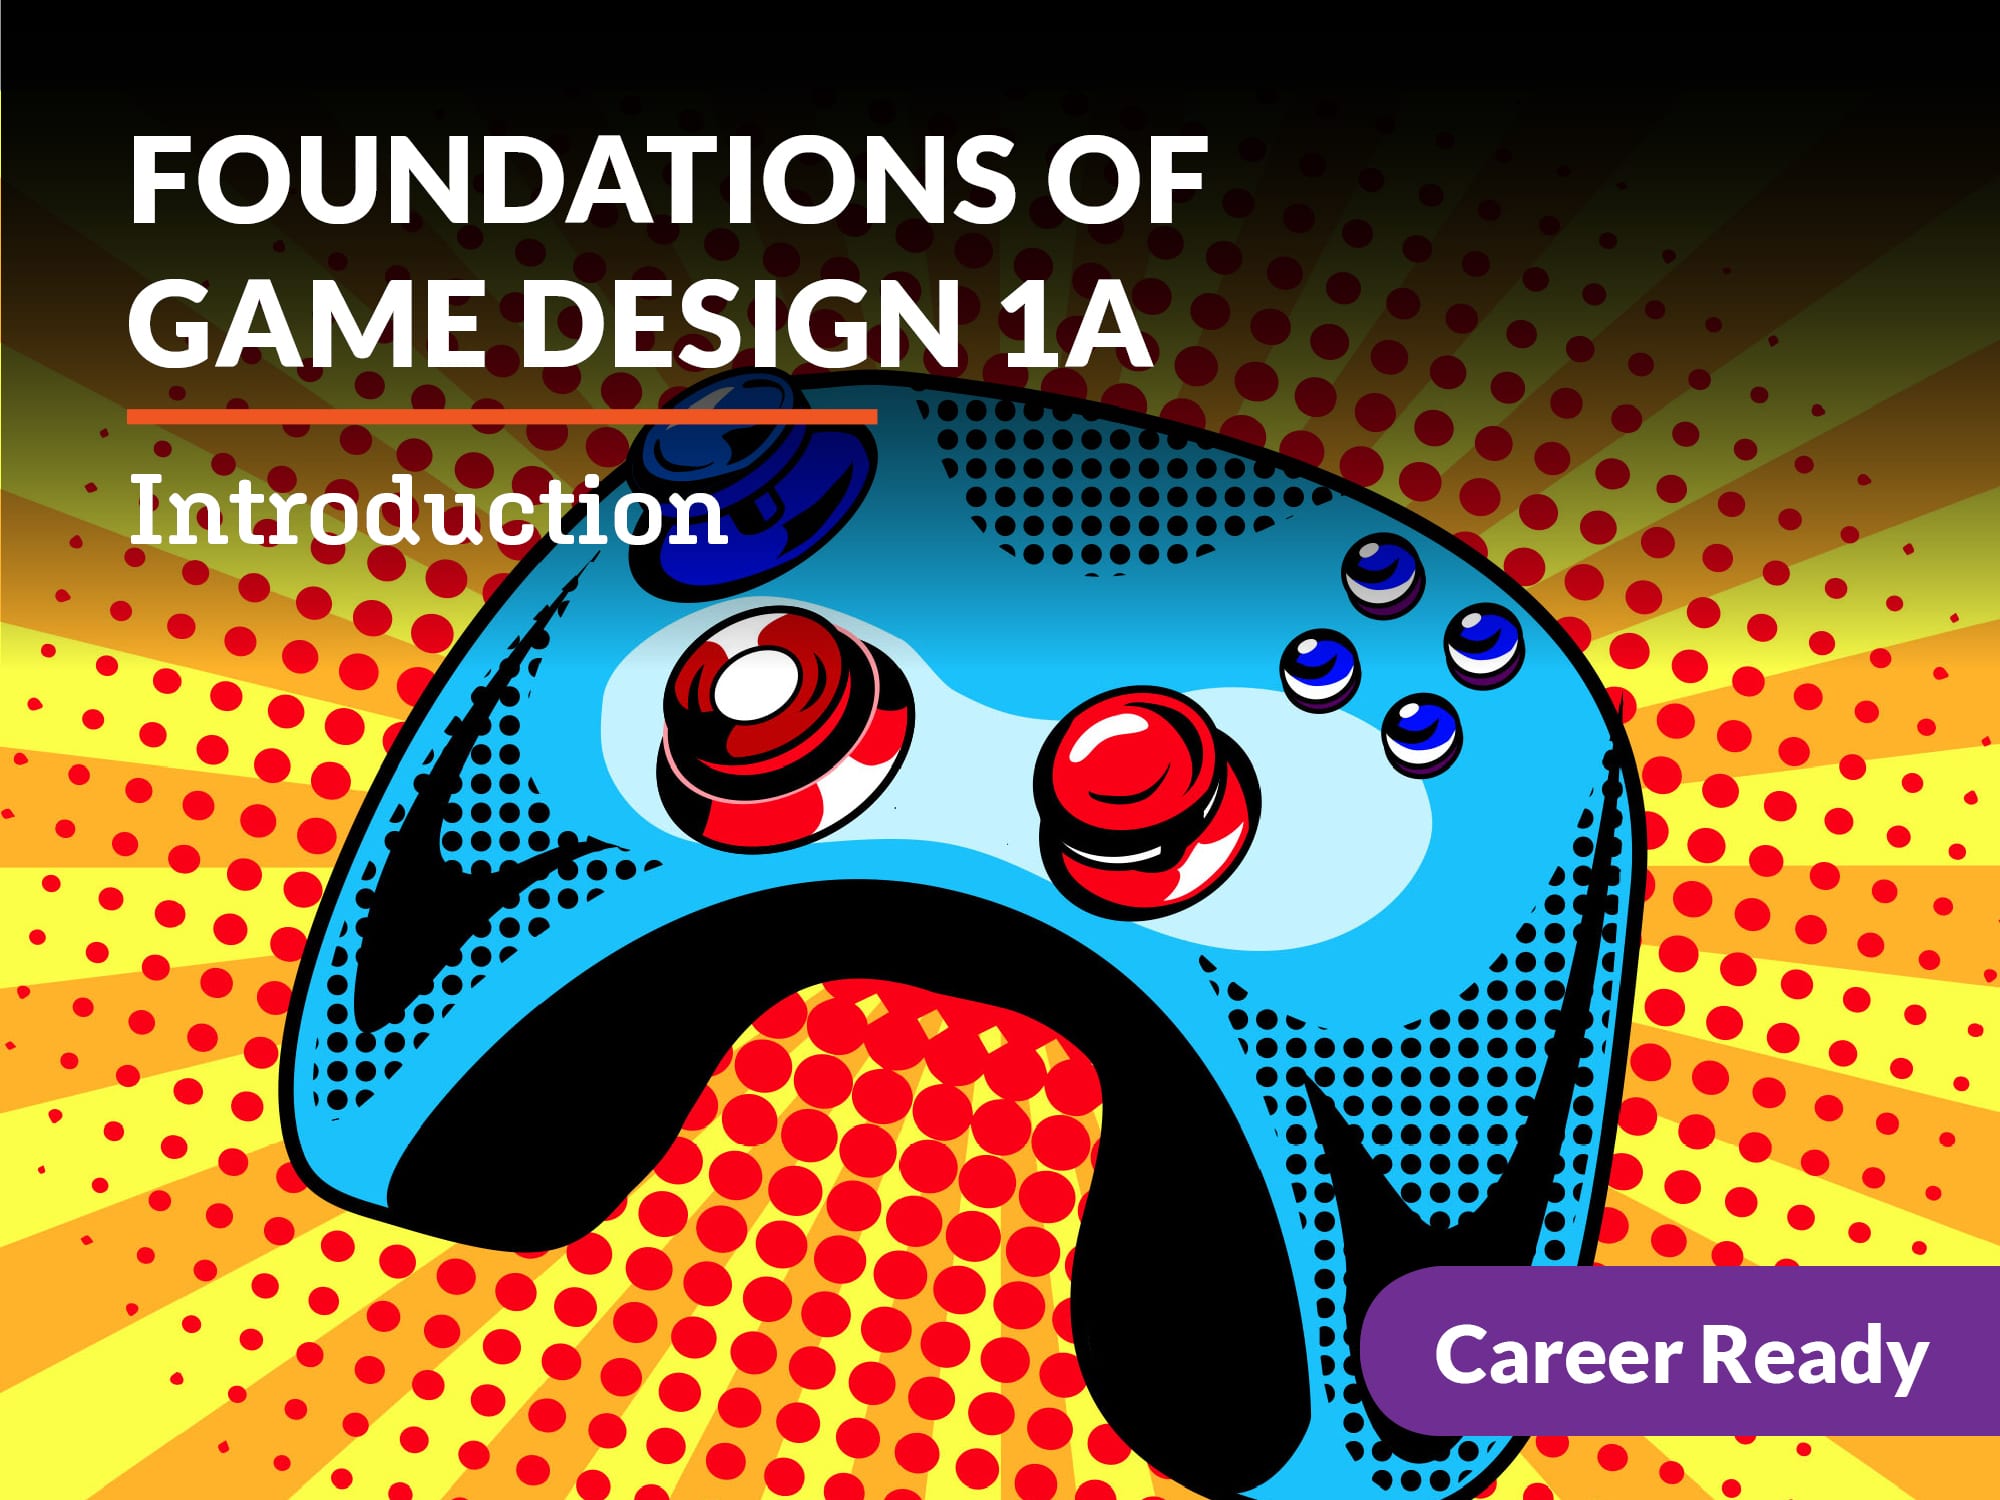 Foundations of Game Design 1a: Introduction